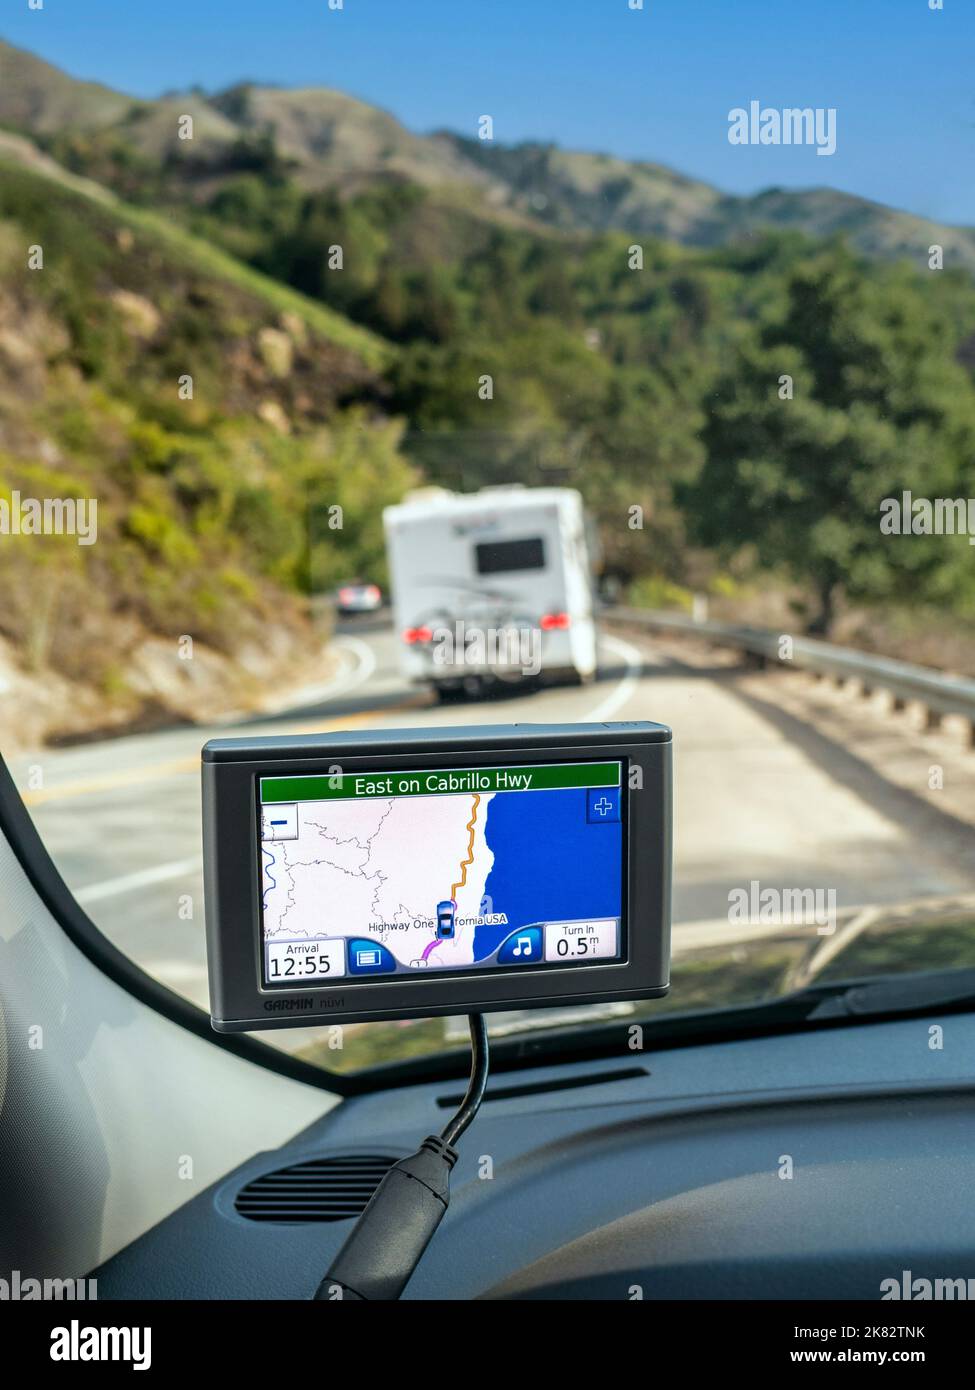 SAT NAV Highway One with white RV on a vacation tour Satellite Navigation screen display of coastal Cabrillo HWY I  Monterey Pacific Ocean California Stock Photo